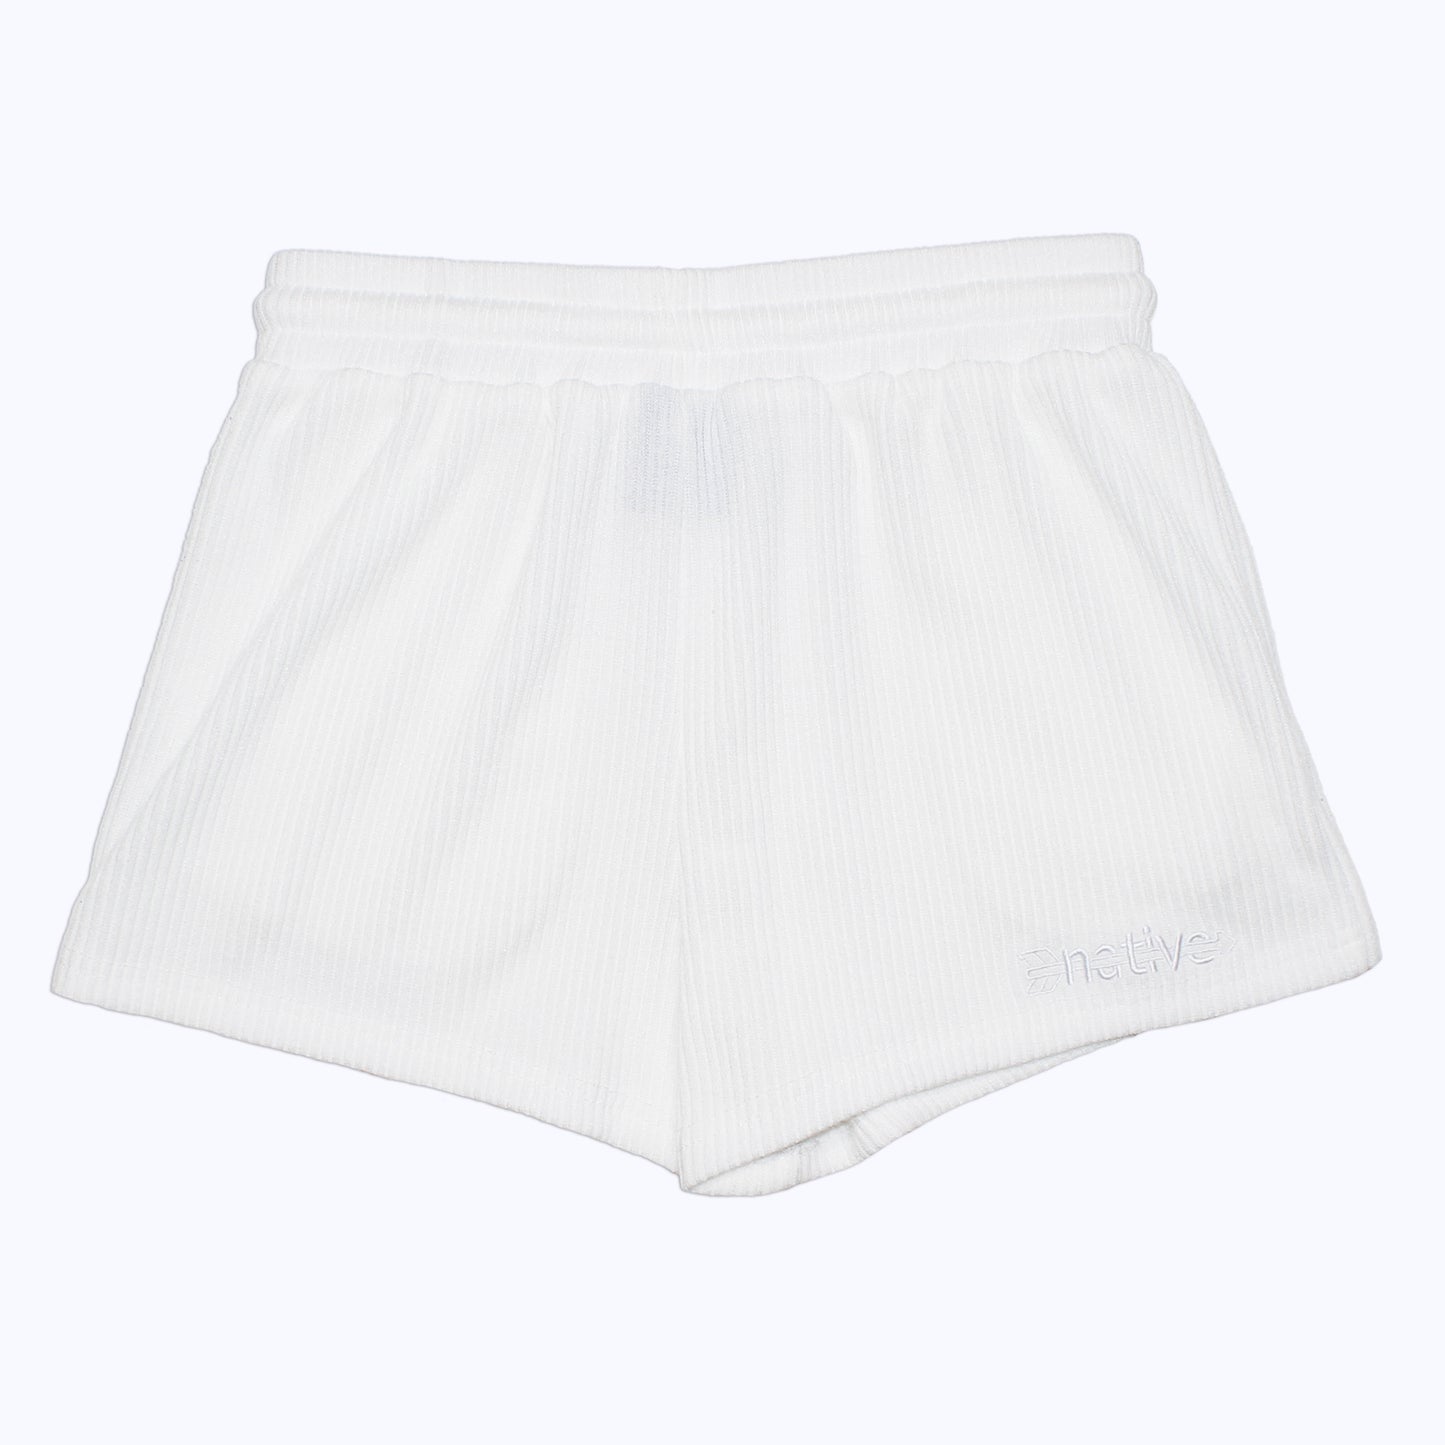 corduroy knit shorties in whiteout